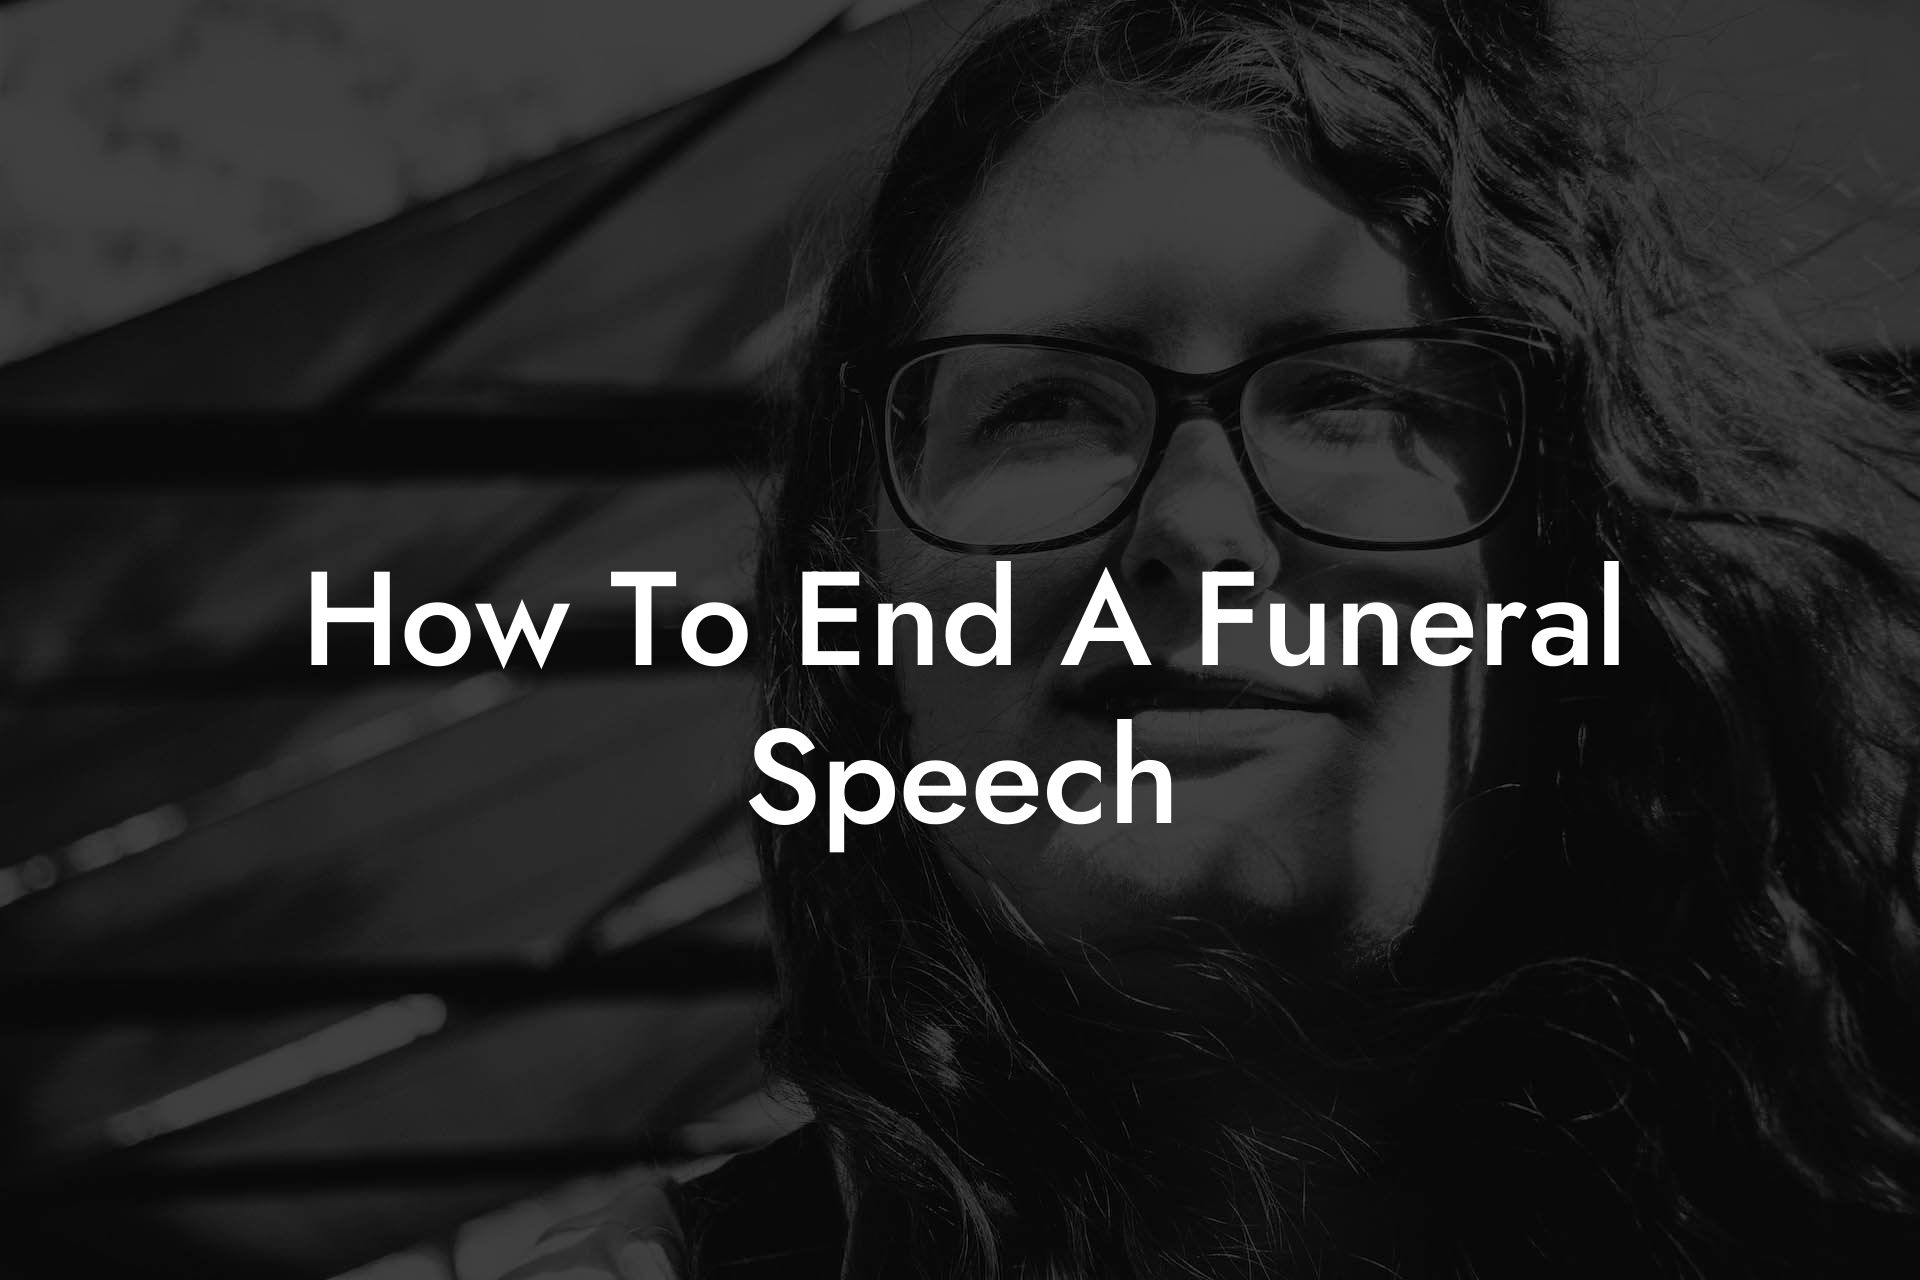 How To End A Funeral Speech